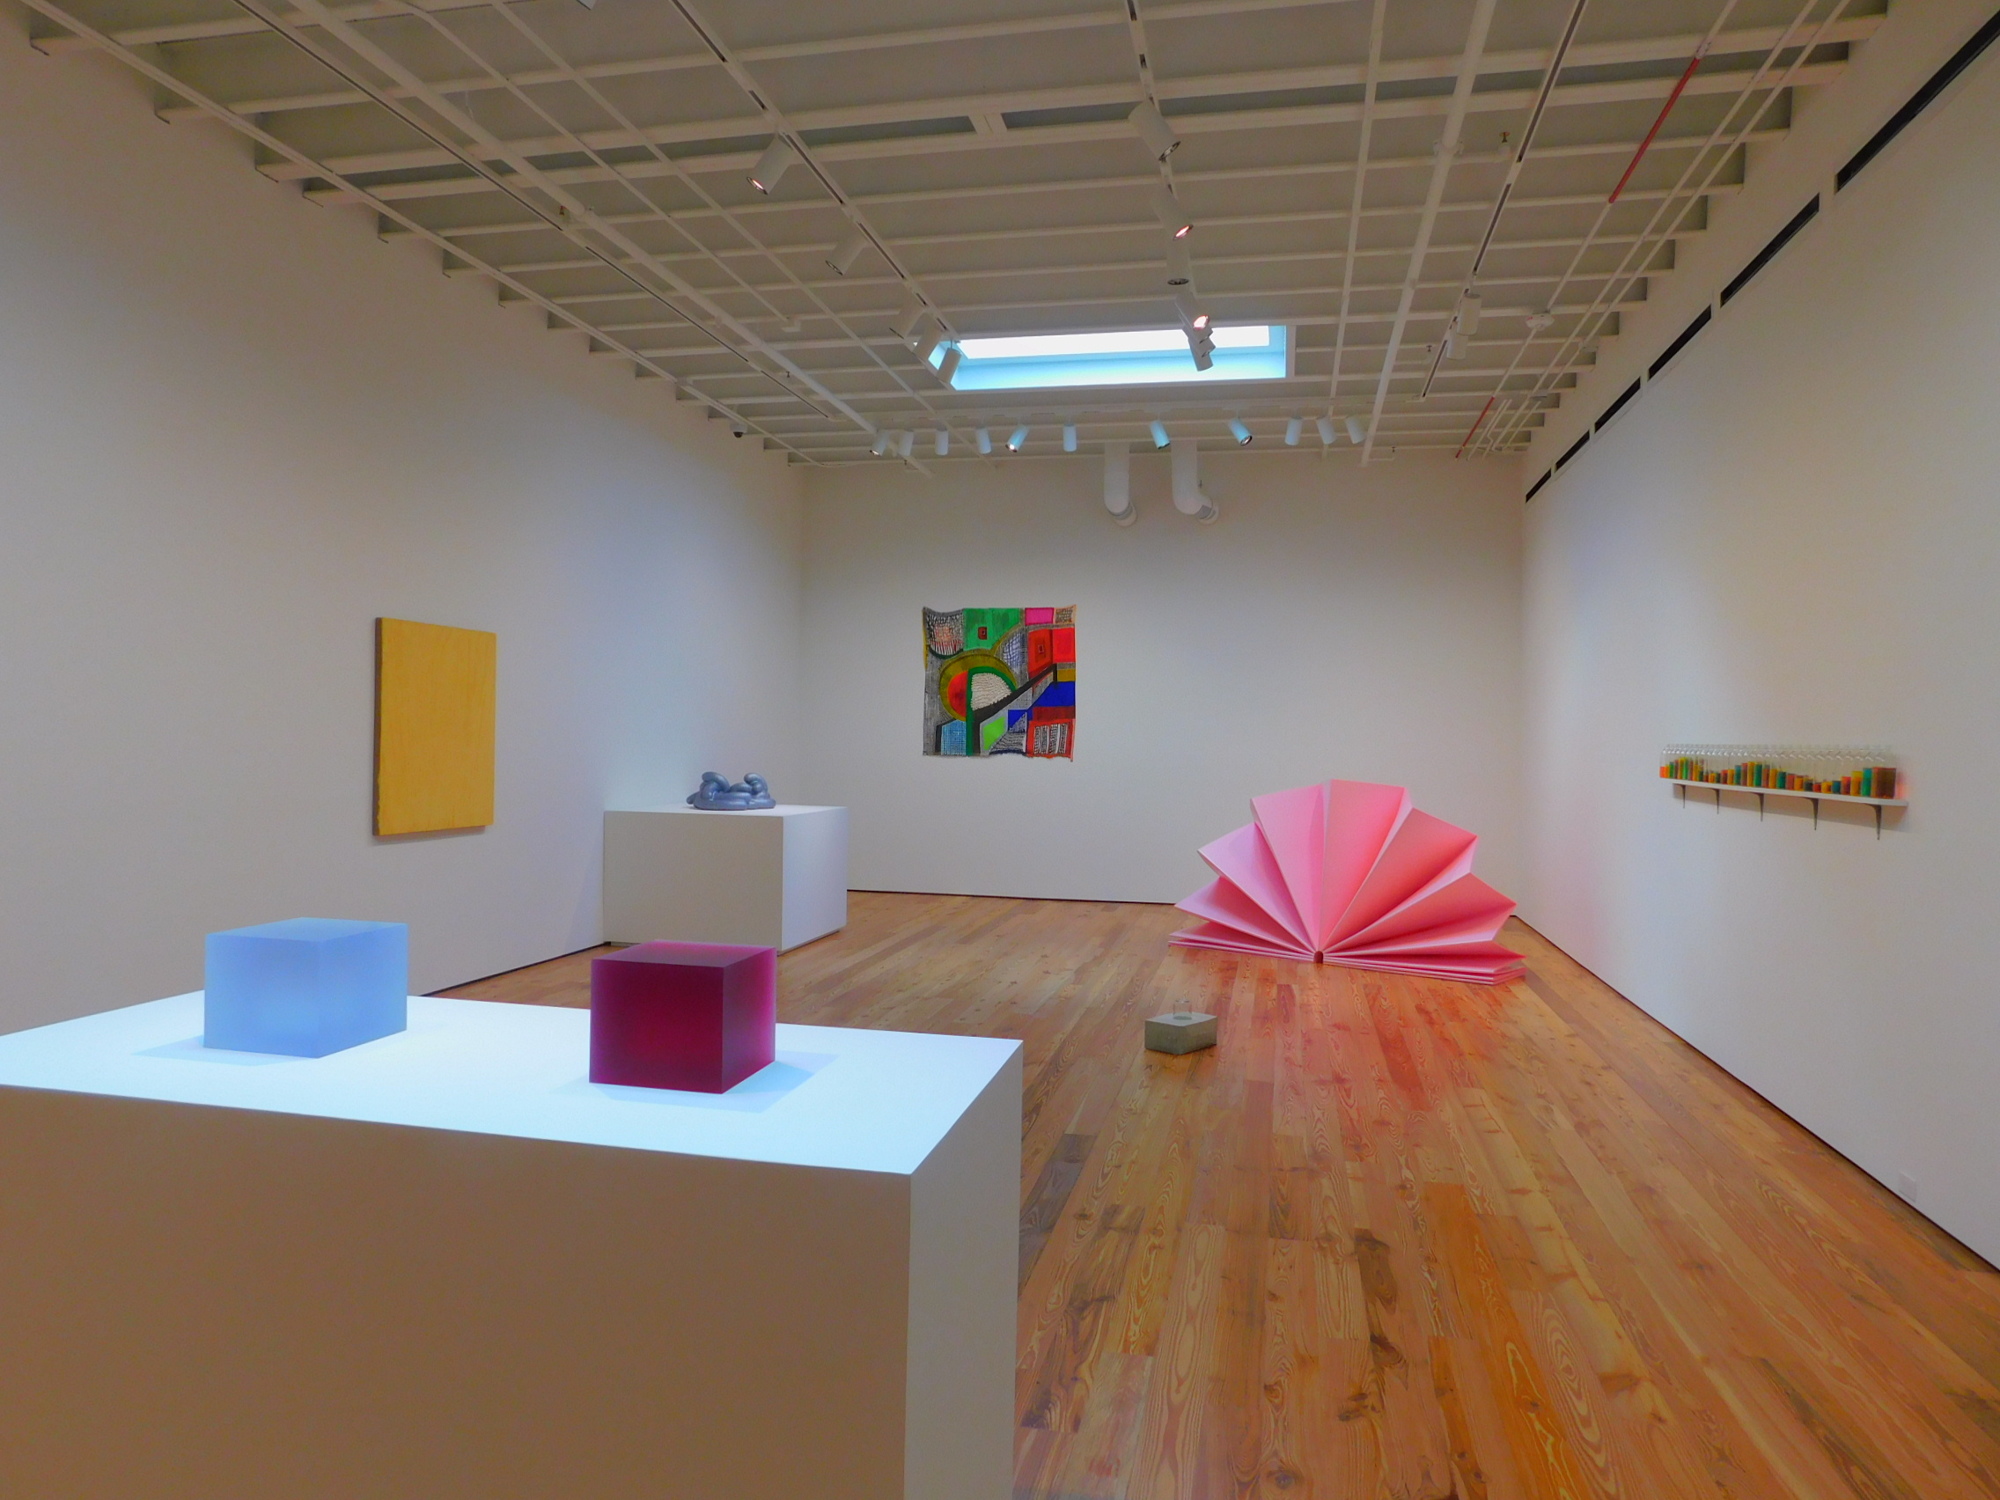 Sarasota Art Museum is the city's first museum dedicated to contemporary art.